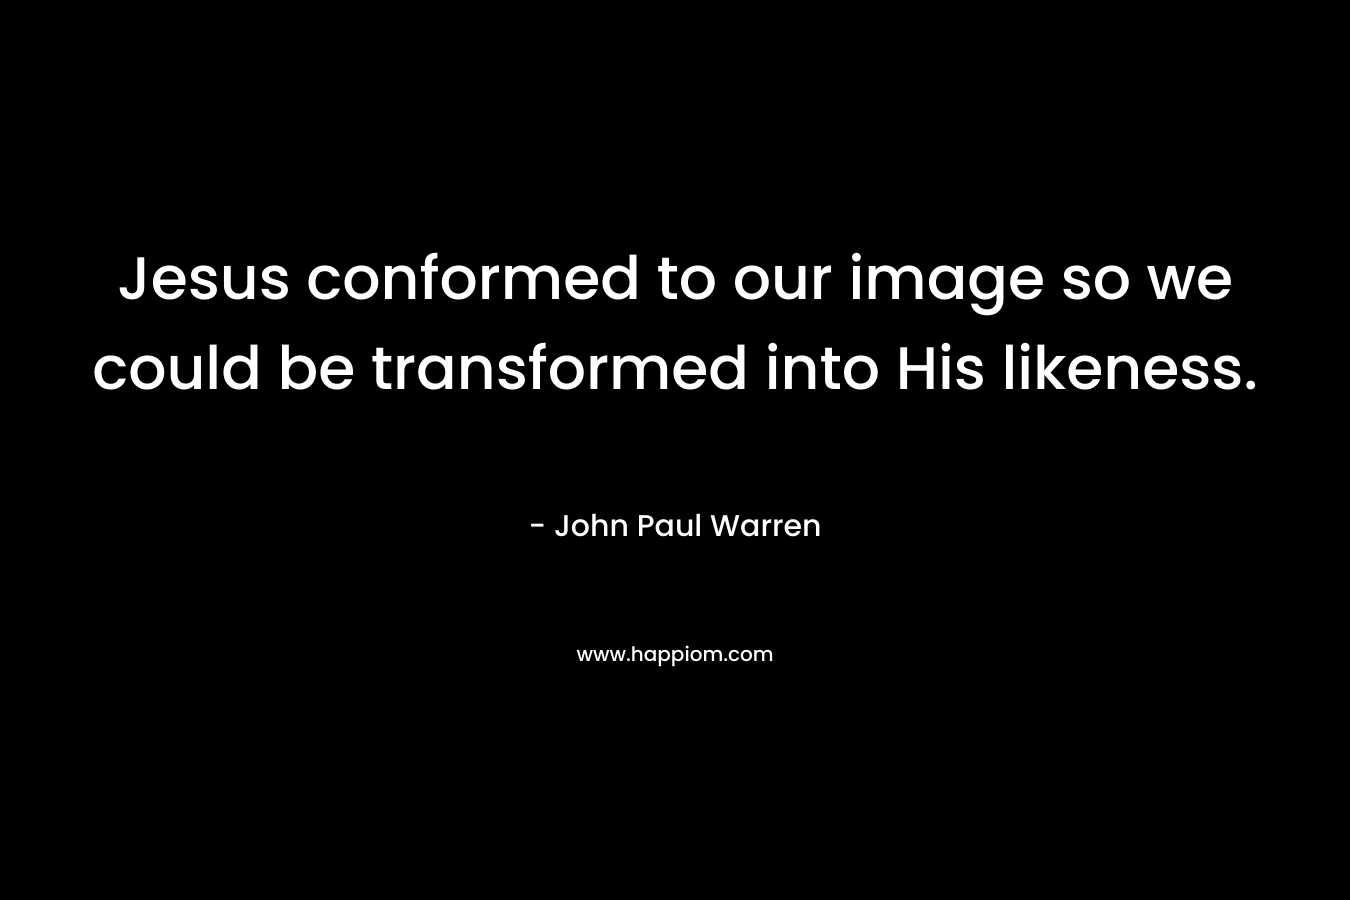 Jesus conformed to our image so we could be transformed into His likeness.